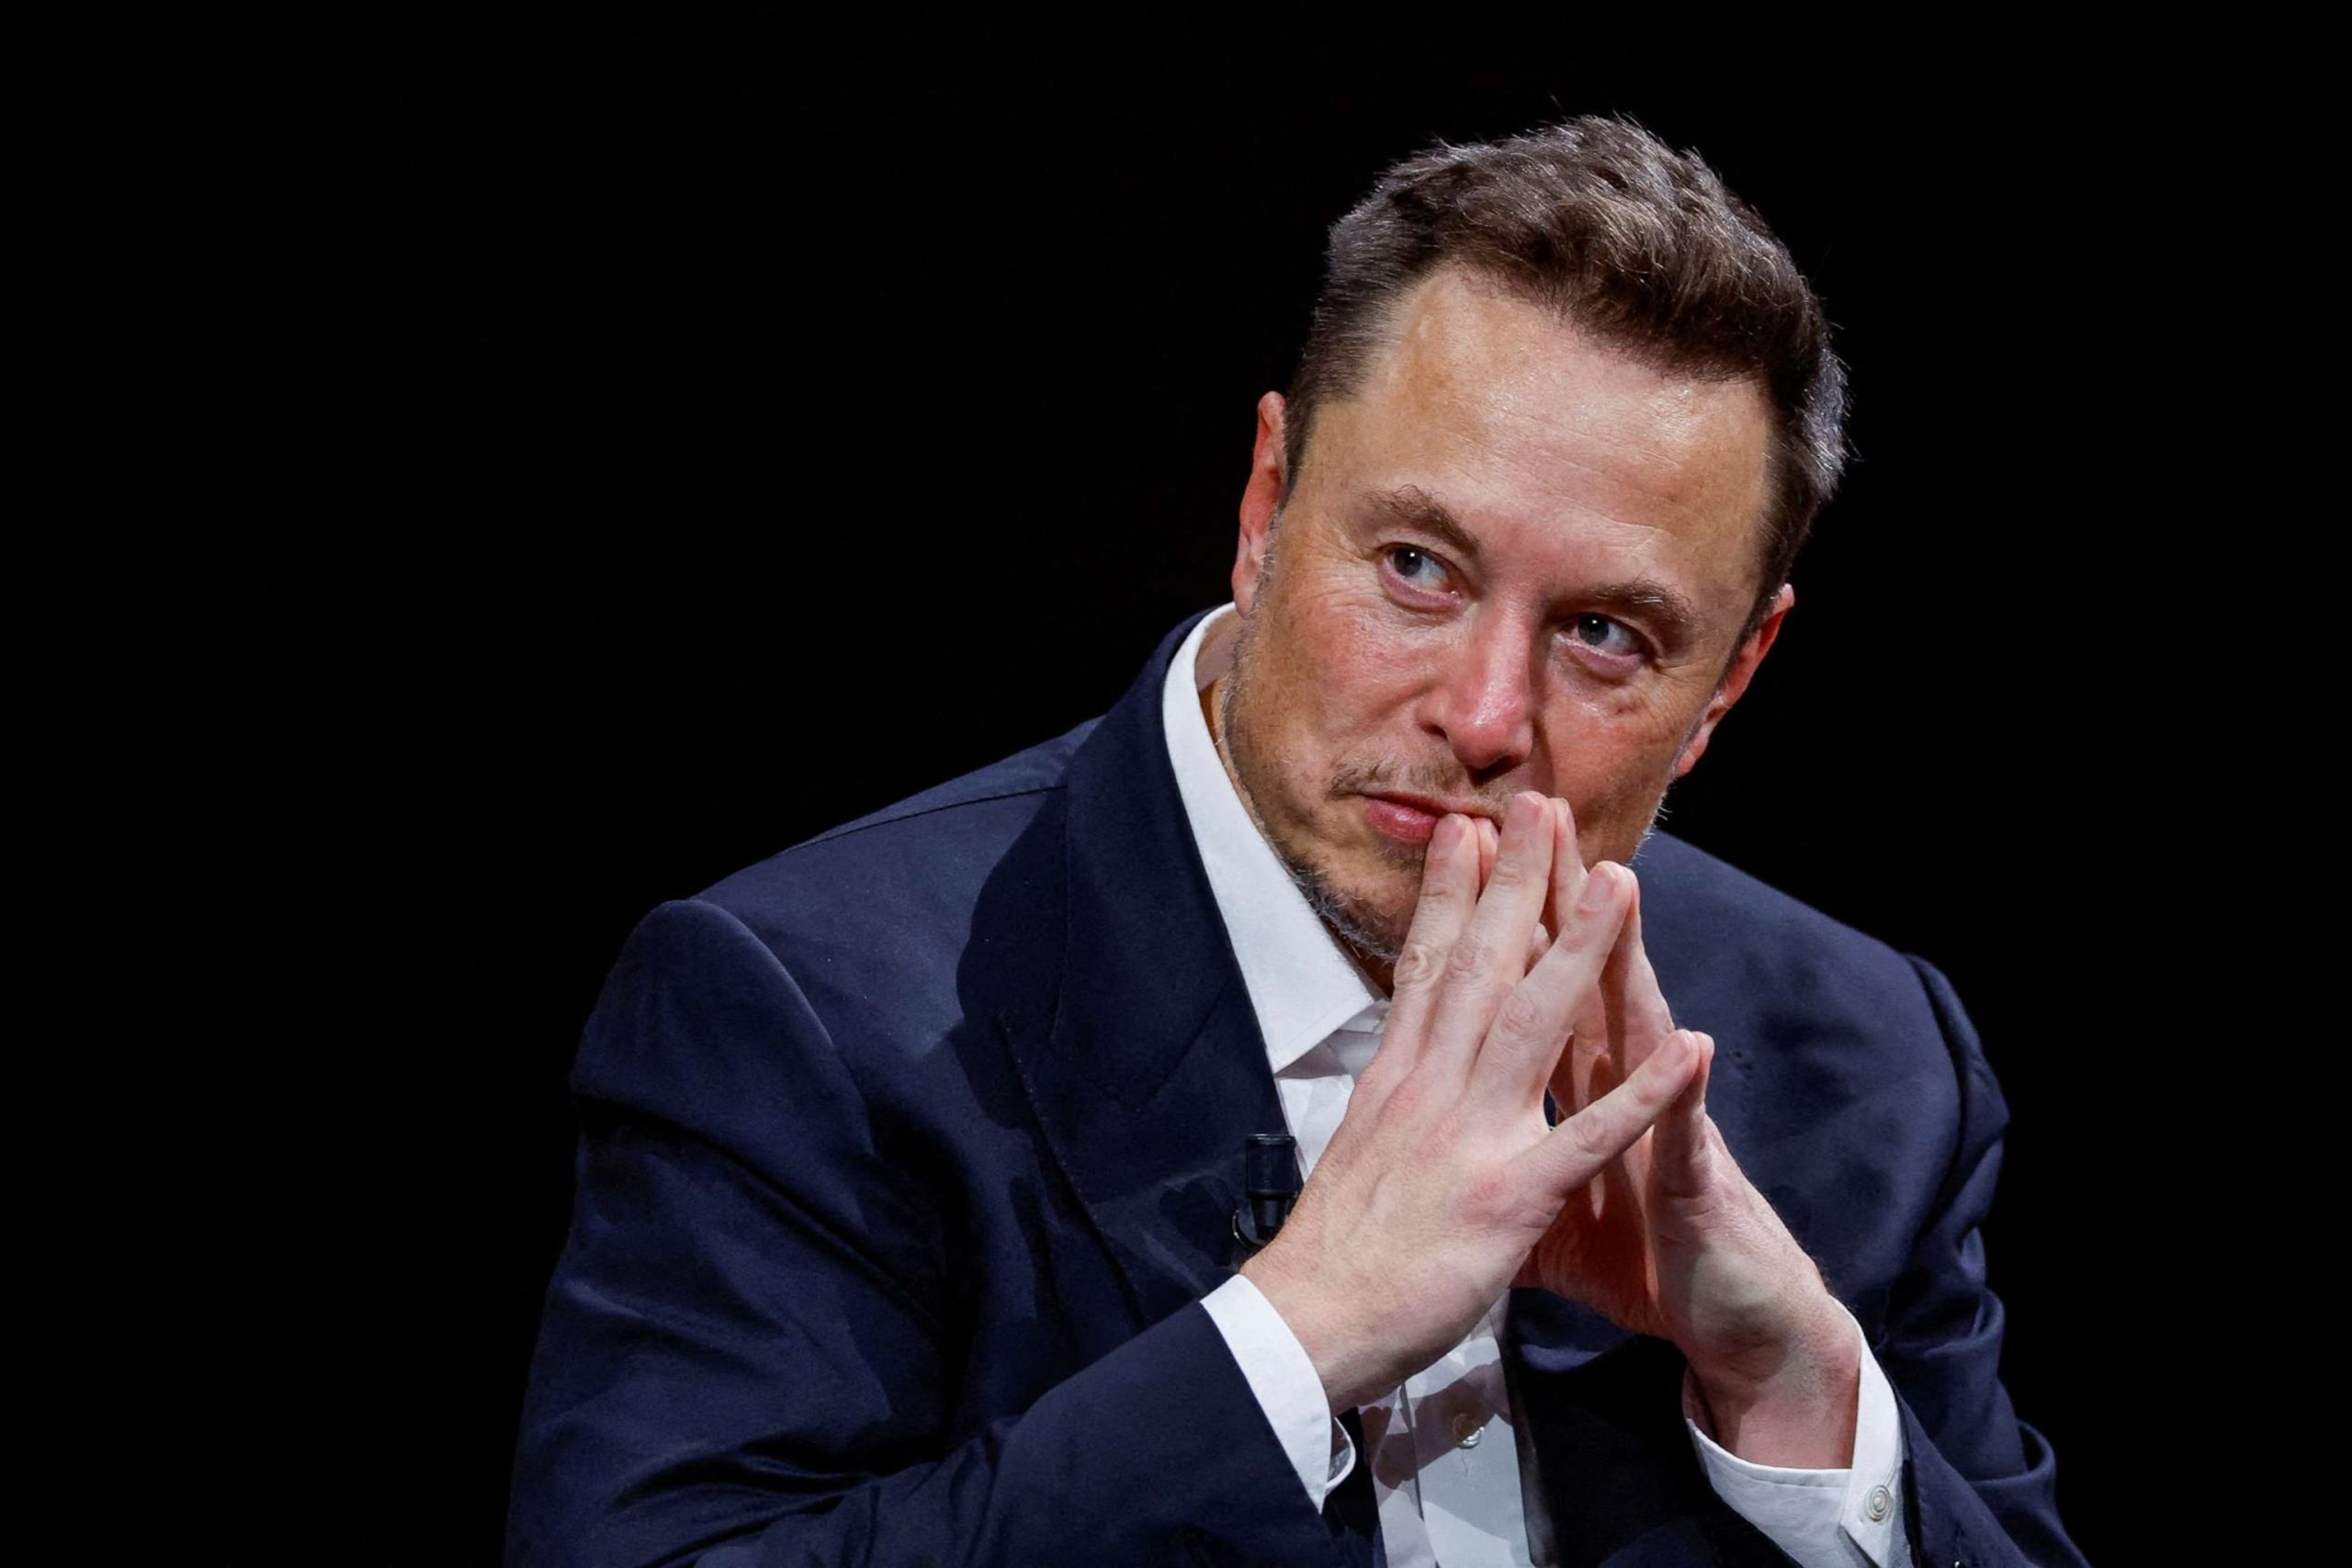 SEC Requests Elon Musk's Testimony in Investigation of Twitter Acquisition